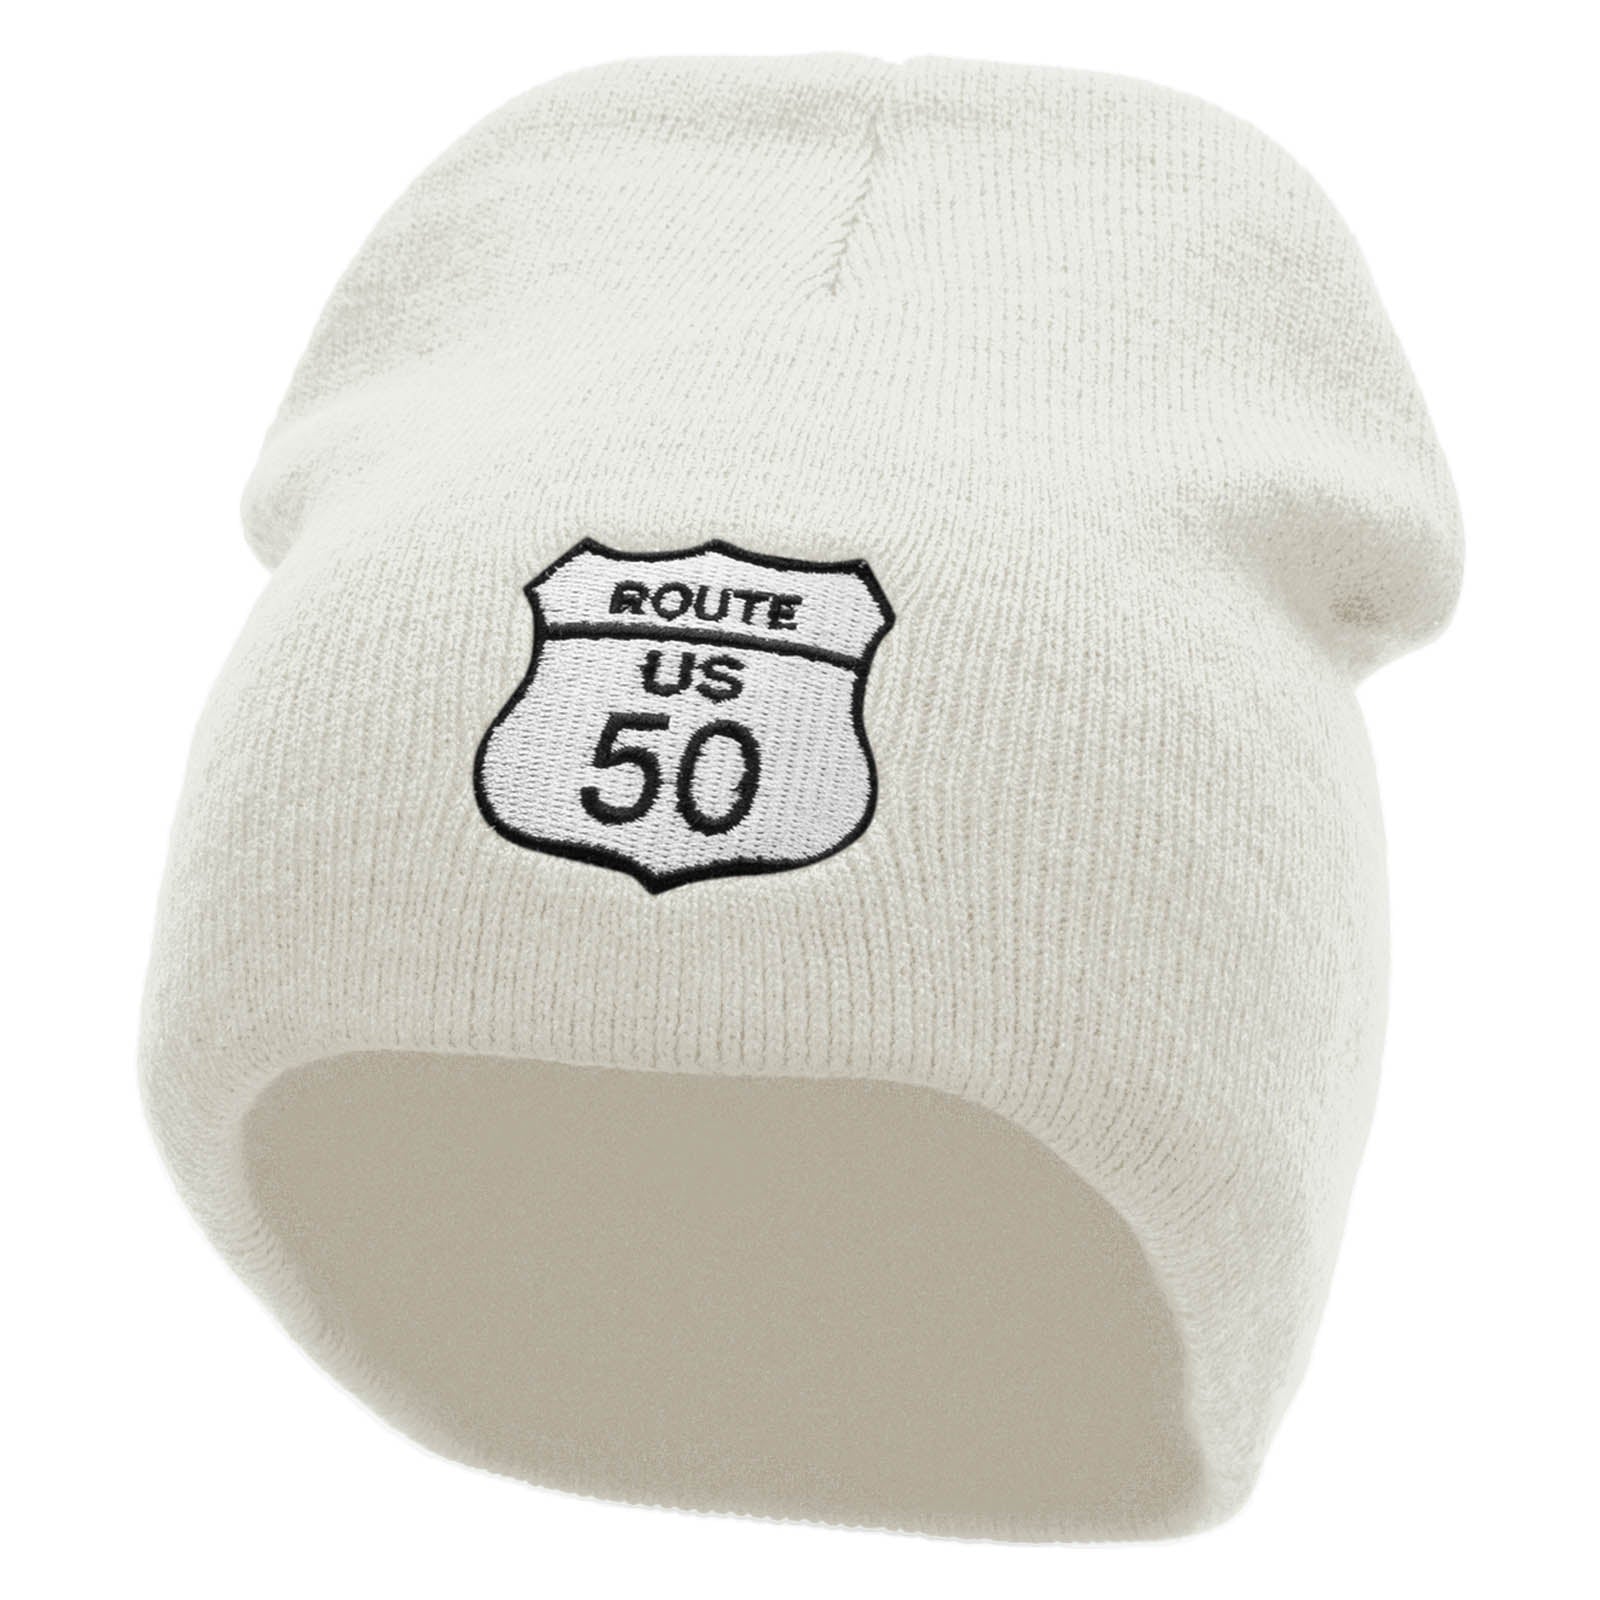 Route US 50 Sign Embroidered 8 inch Acrylic Short Blank Beanie - White OSFM